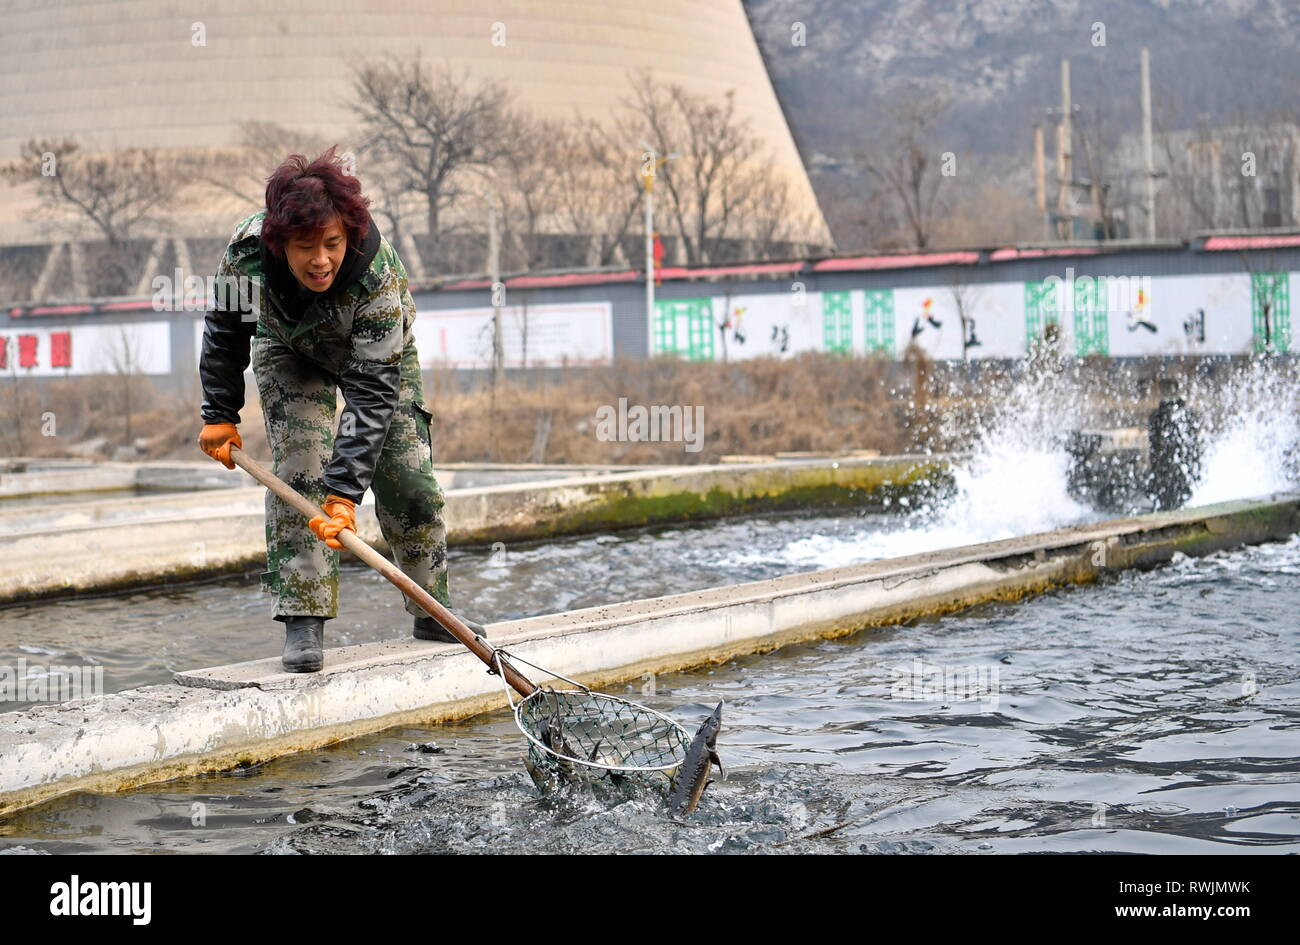 (190307) -- PINGDING, March 7, 2019 (Xinhua) -- Villager Kang Ruiqing fishes in a cooperative aqua farm in Podi Village, Niangziguan Town, Pingding County, north China's Shanxi Province, on Feb. 26, 2019. The women of Niangziguan Town have played a vital role in developing local tourism industry under a poverty alleviation campaign. Taking tourist experience into consideration, they have made thorough plans to improve key service factors such as routes, catering and accommodation. In turn, the number of tourists have increased. All residents in Niangziguan Town have been helped out of poverty  Stock Photo